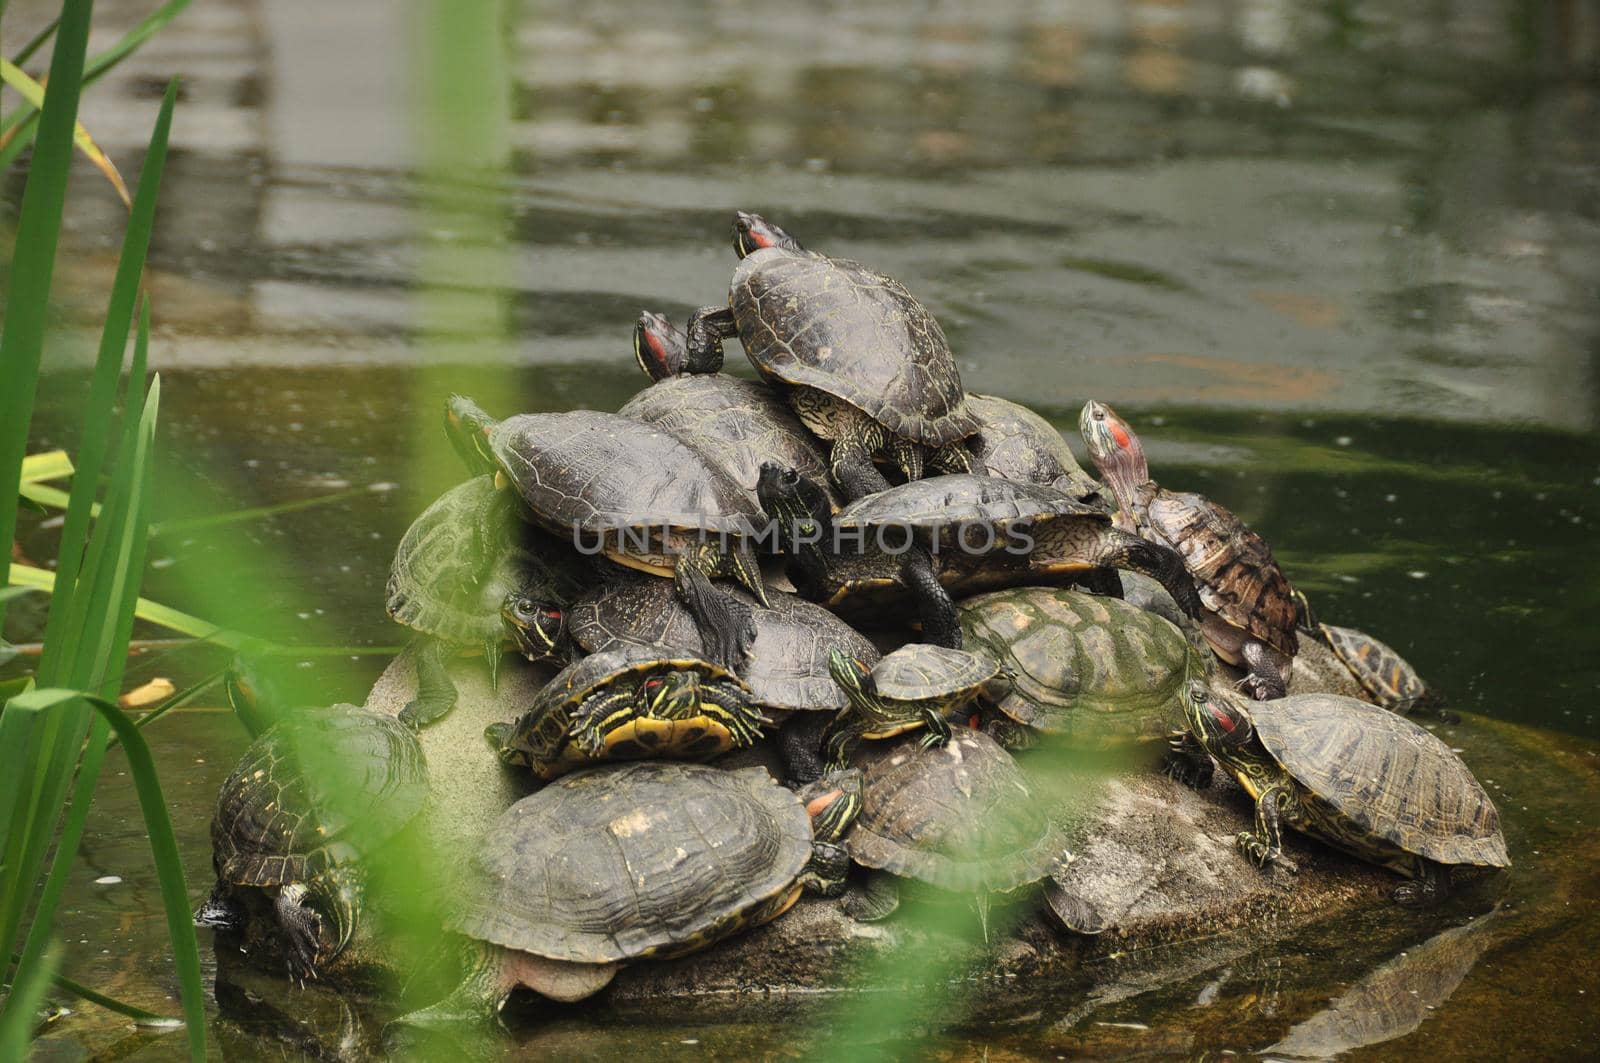 Group of turtles climbing each other while gathering on rock in water of pond. Group of turtles on rock in water